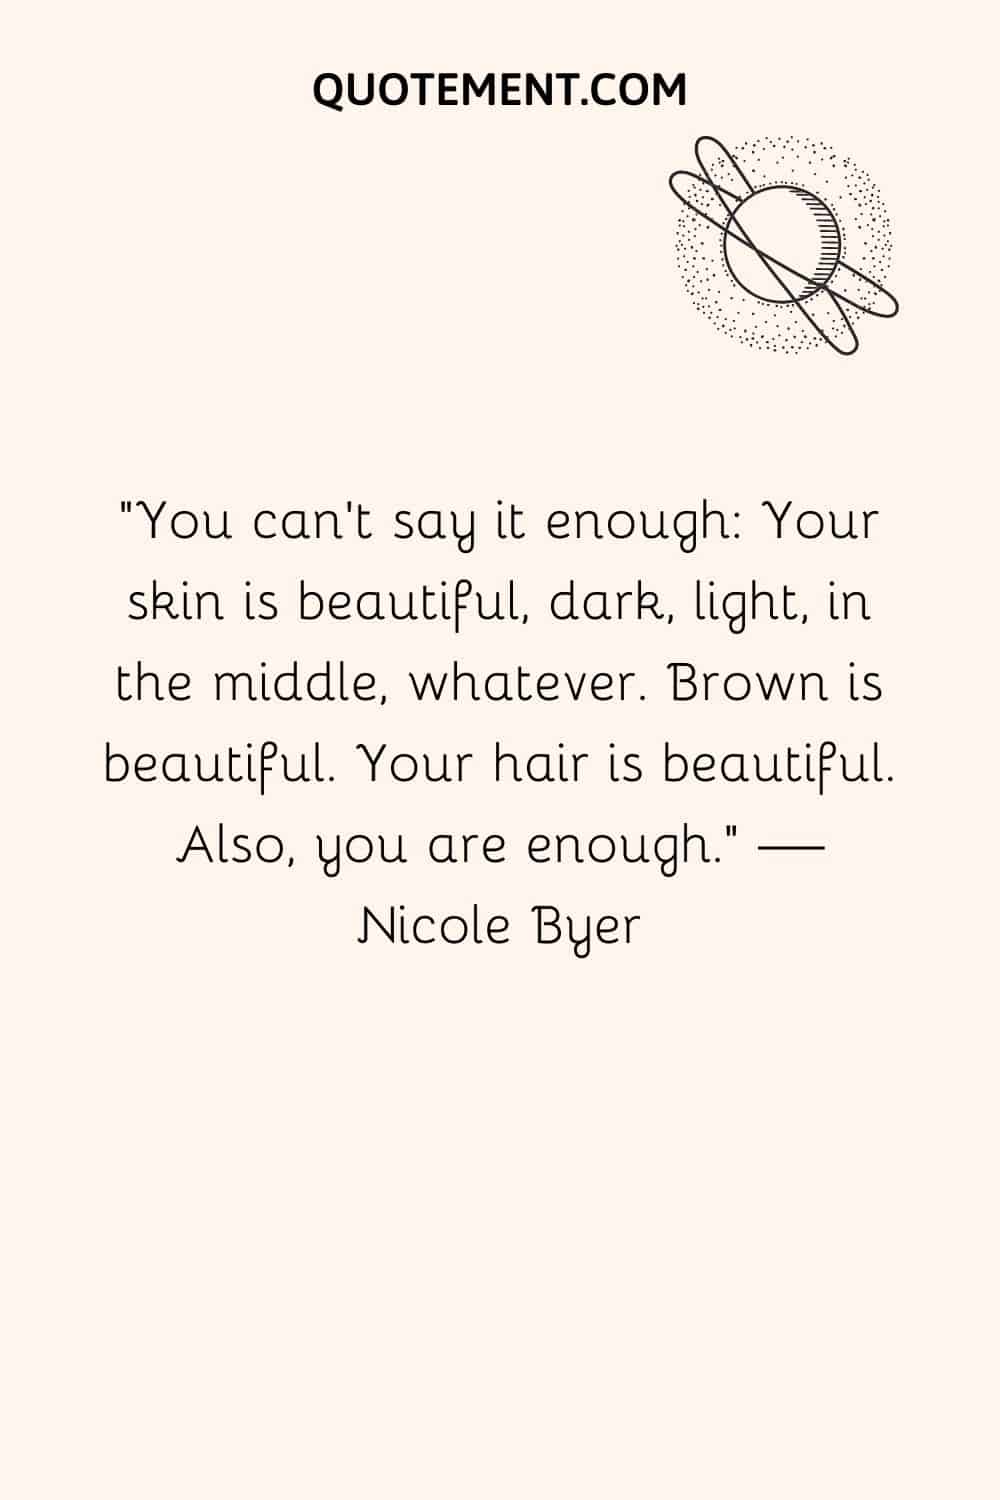 You can’t say it enough Your skin is beautiful, dark, light, in the middle, whatever